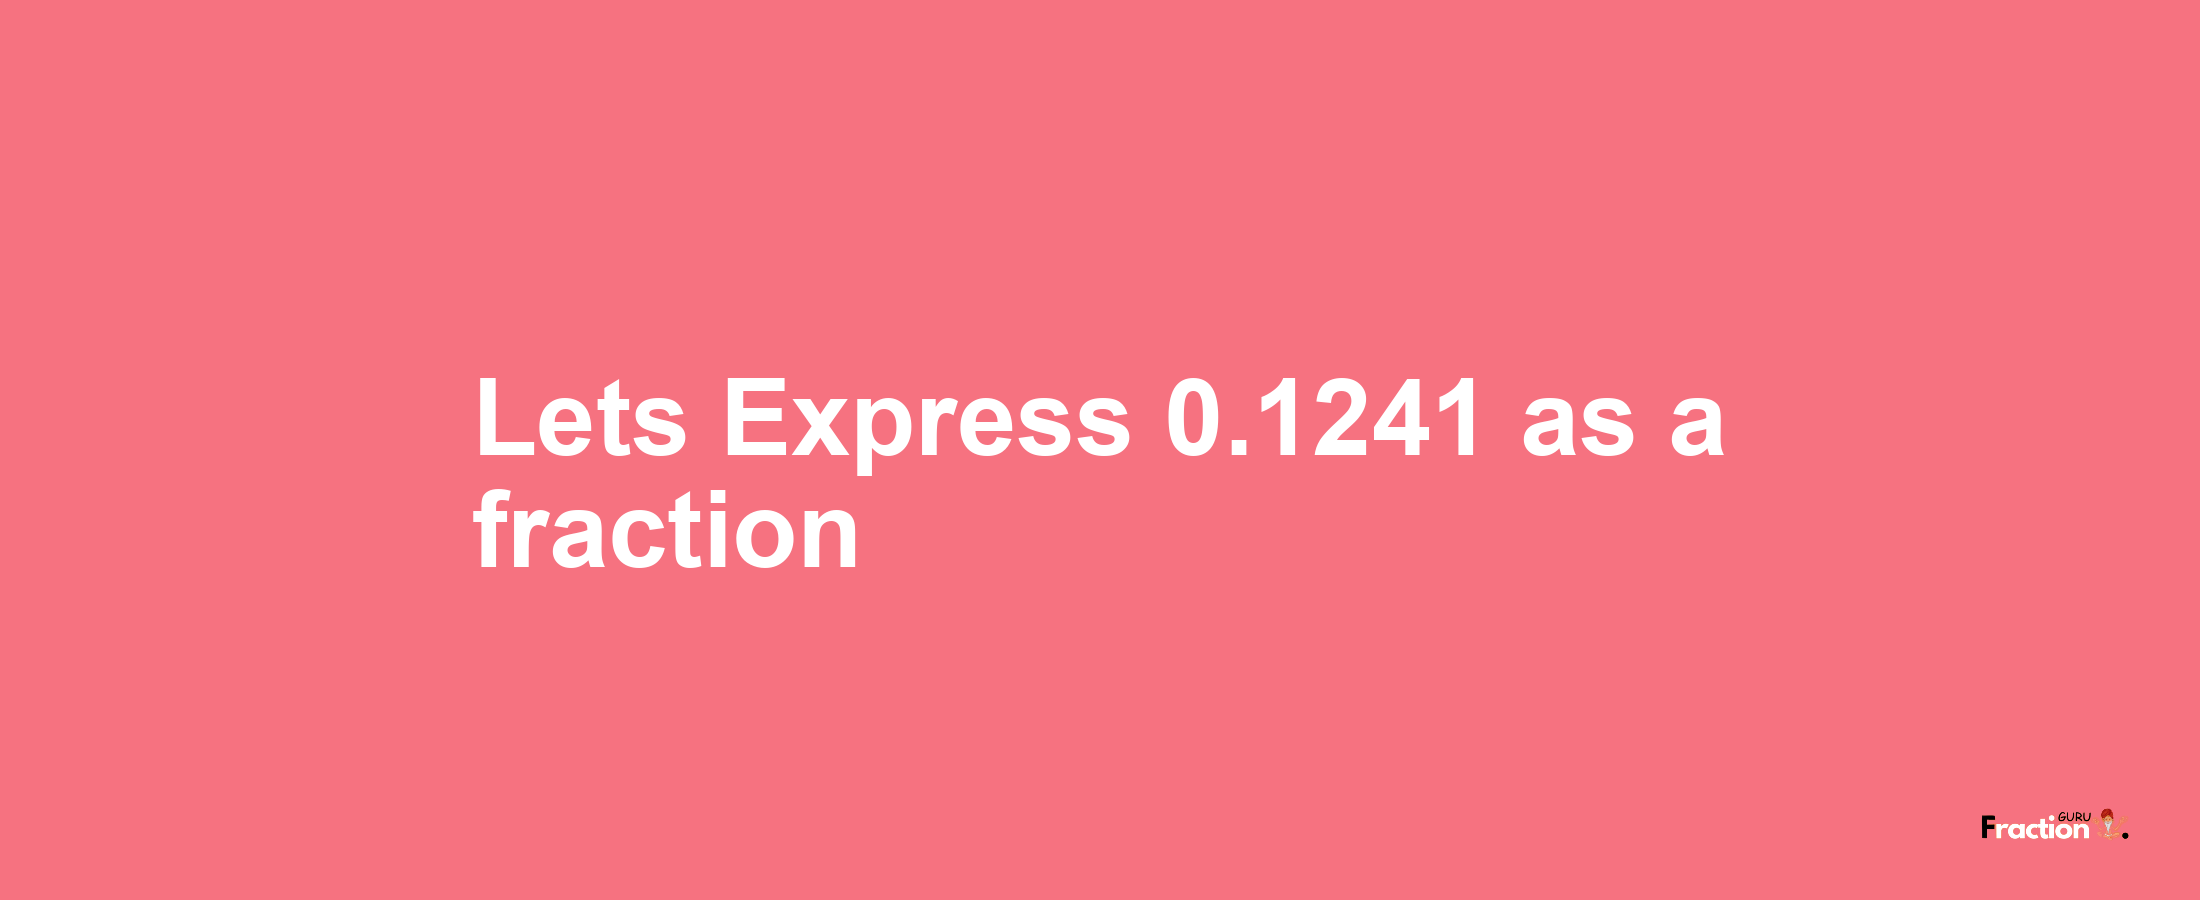 Lets Express 0.1241 as afraction